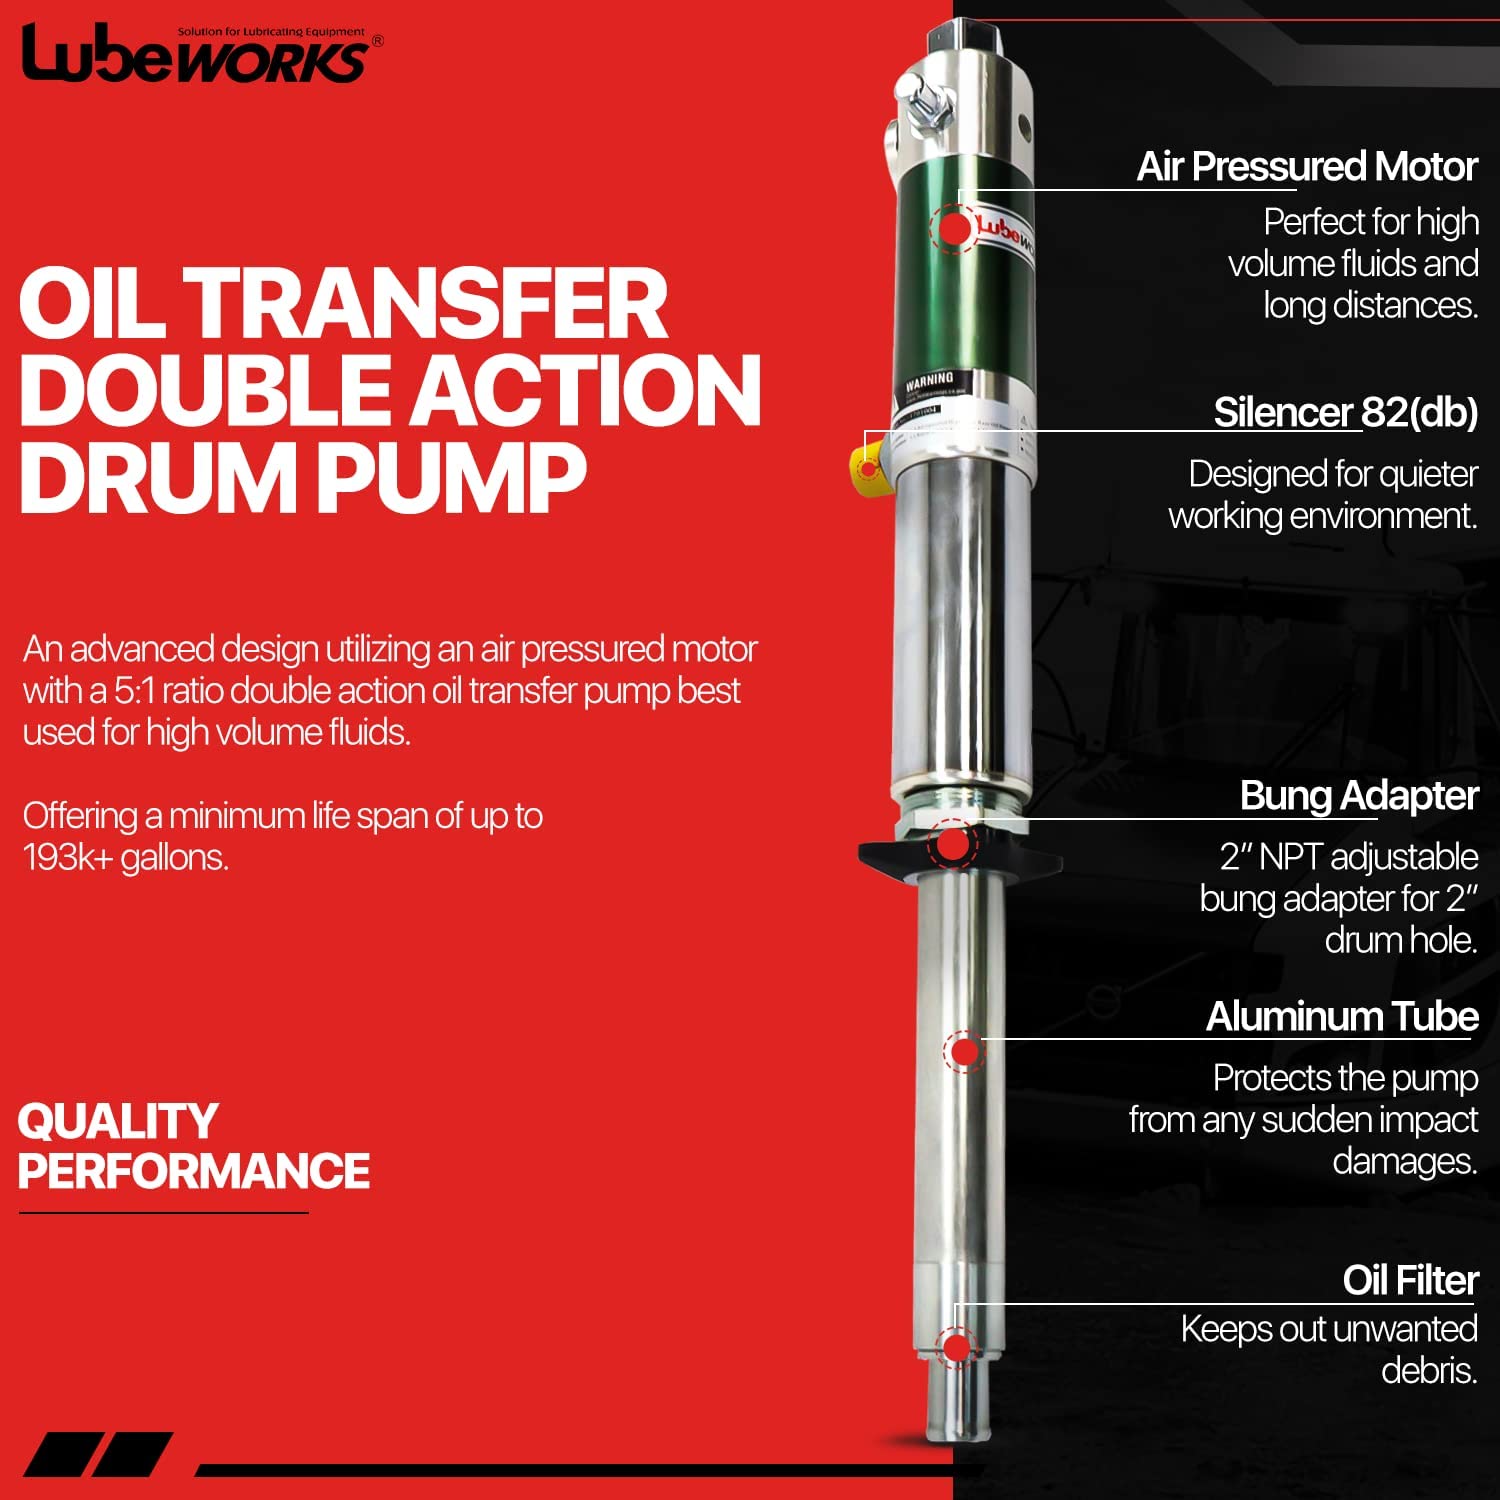 Lubeworks, Lubeworks GUL003 5 in 1 Fast Flow Rate 6.6 GPM / 25LPM for SAE240 Oil/Fluids Transfer Drum Pump Double Action New